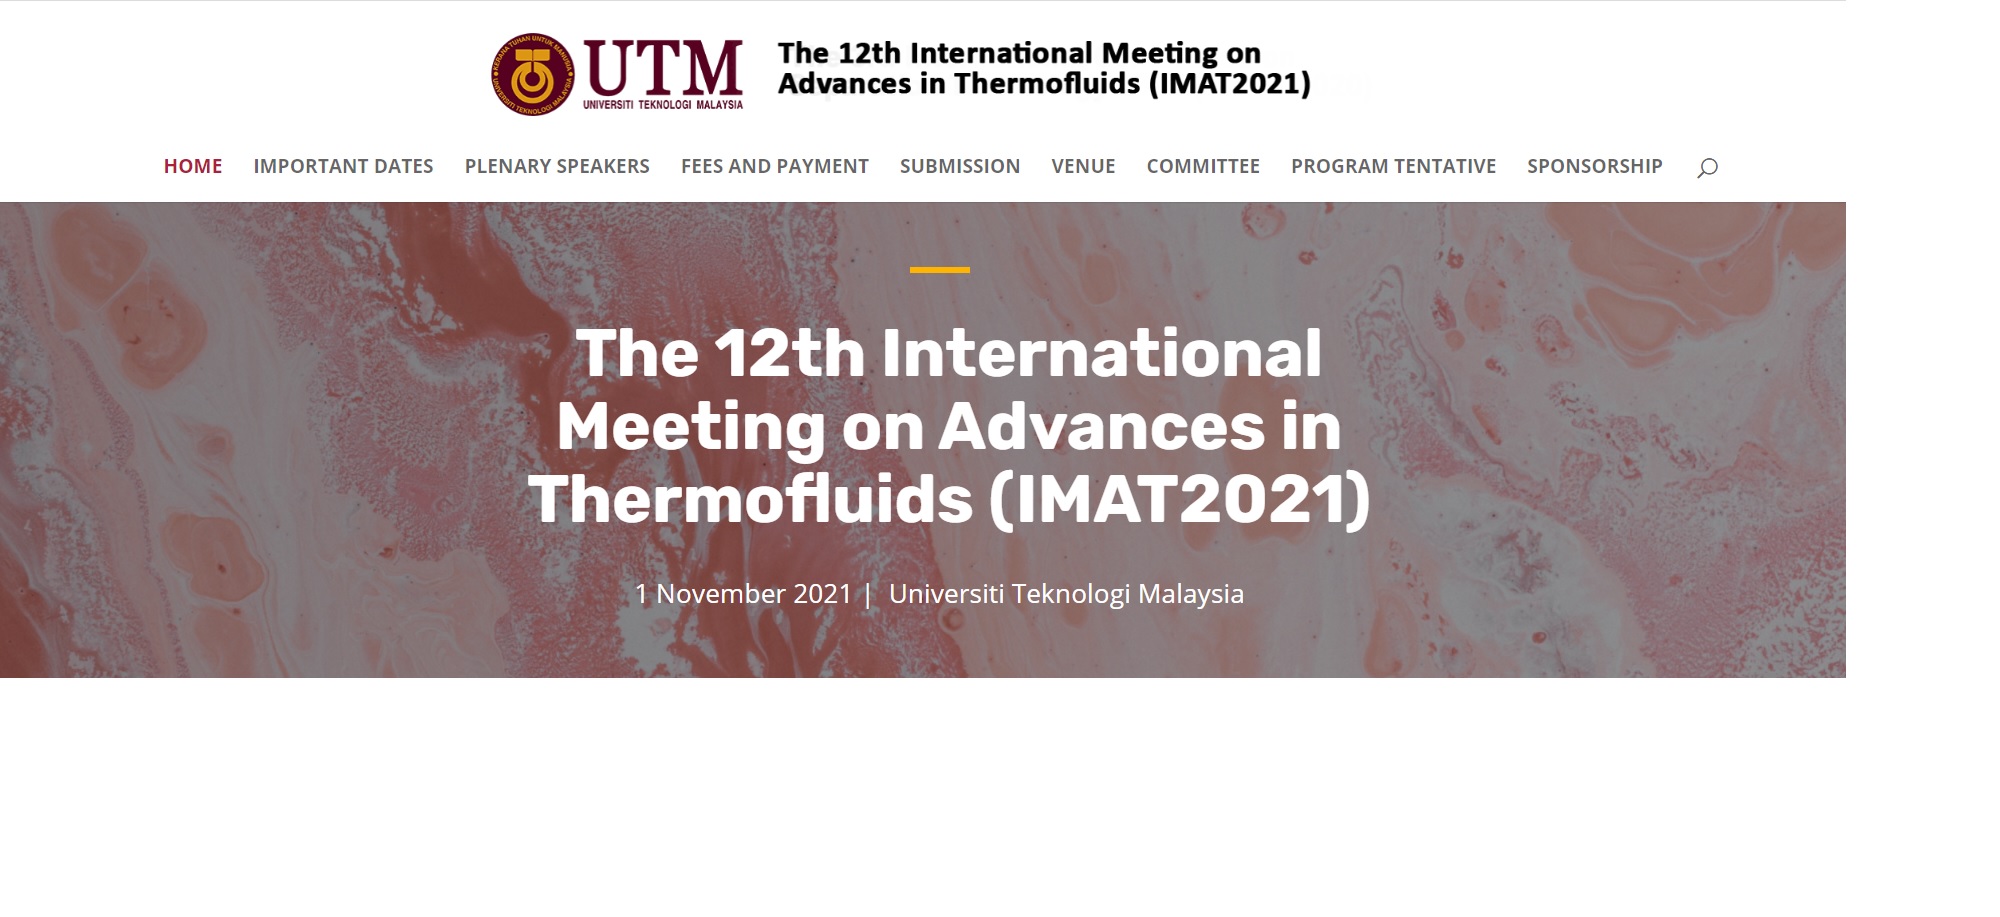 The 12th International Meeting on Advances in Thermofluids (IMAT2021), Online Event